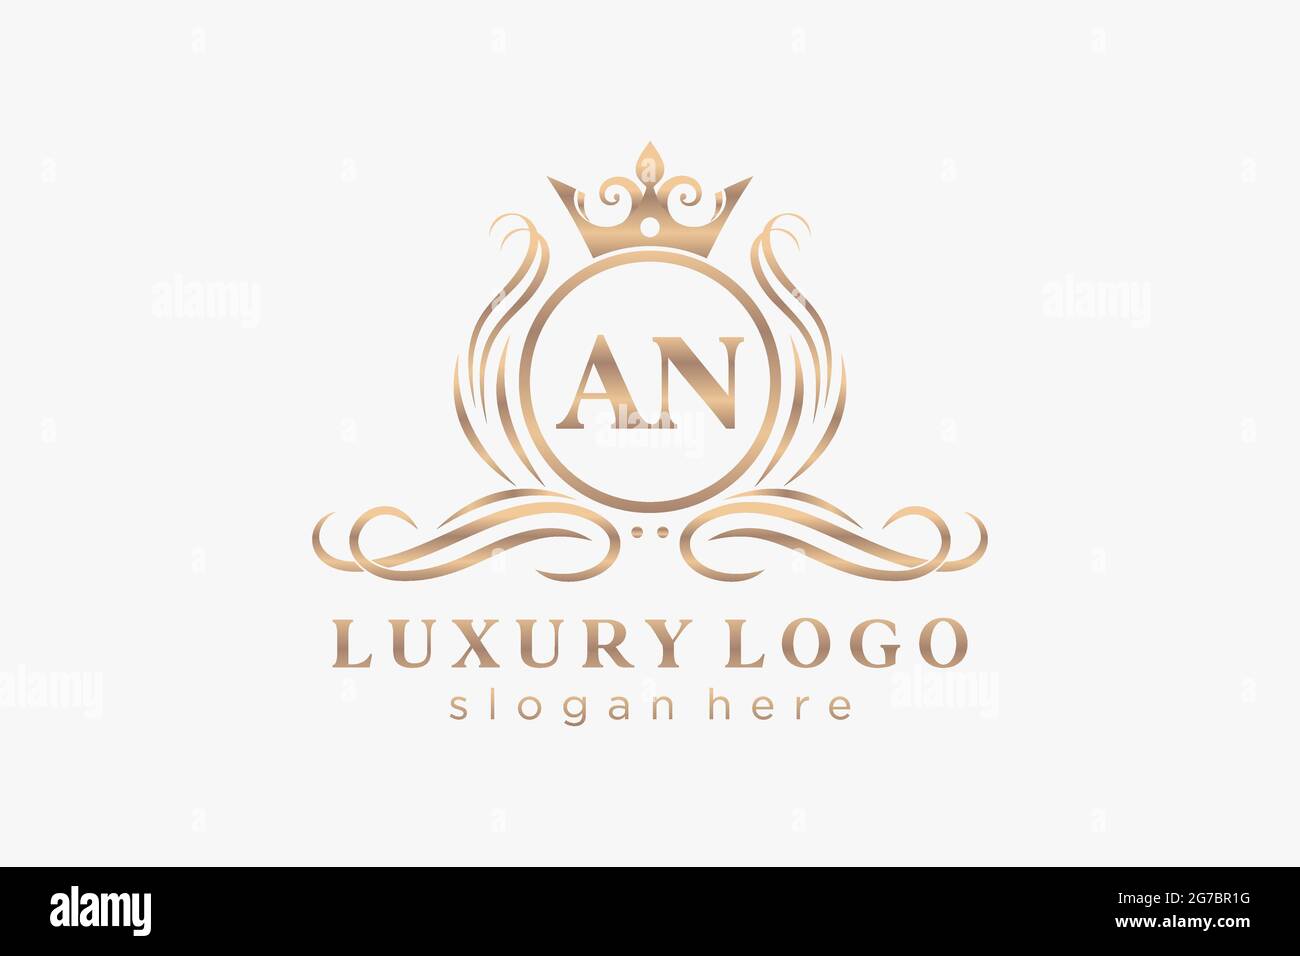 AN Letter Royal Luxury Logo template in vector art for Restaurant, Royalty, Boutique, Cafe, Hotel, Heraldic, Jewelry, Fashion and other vector illustr Stock Vector